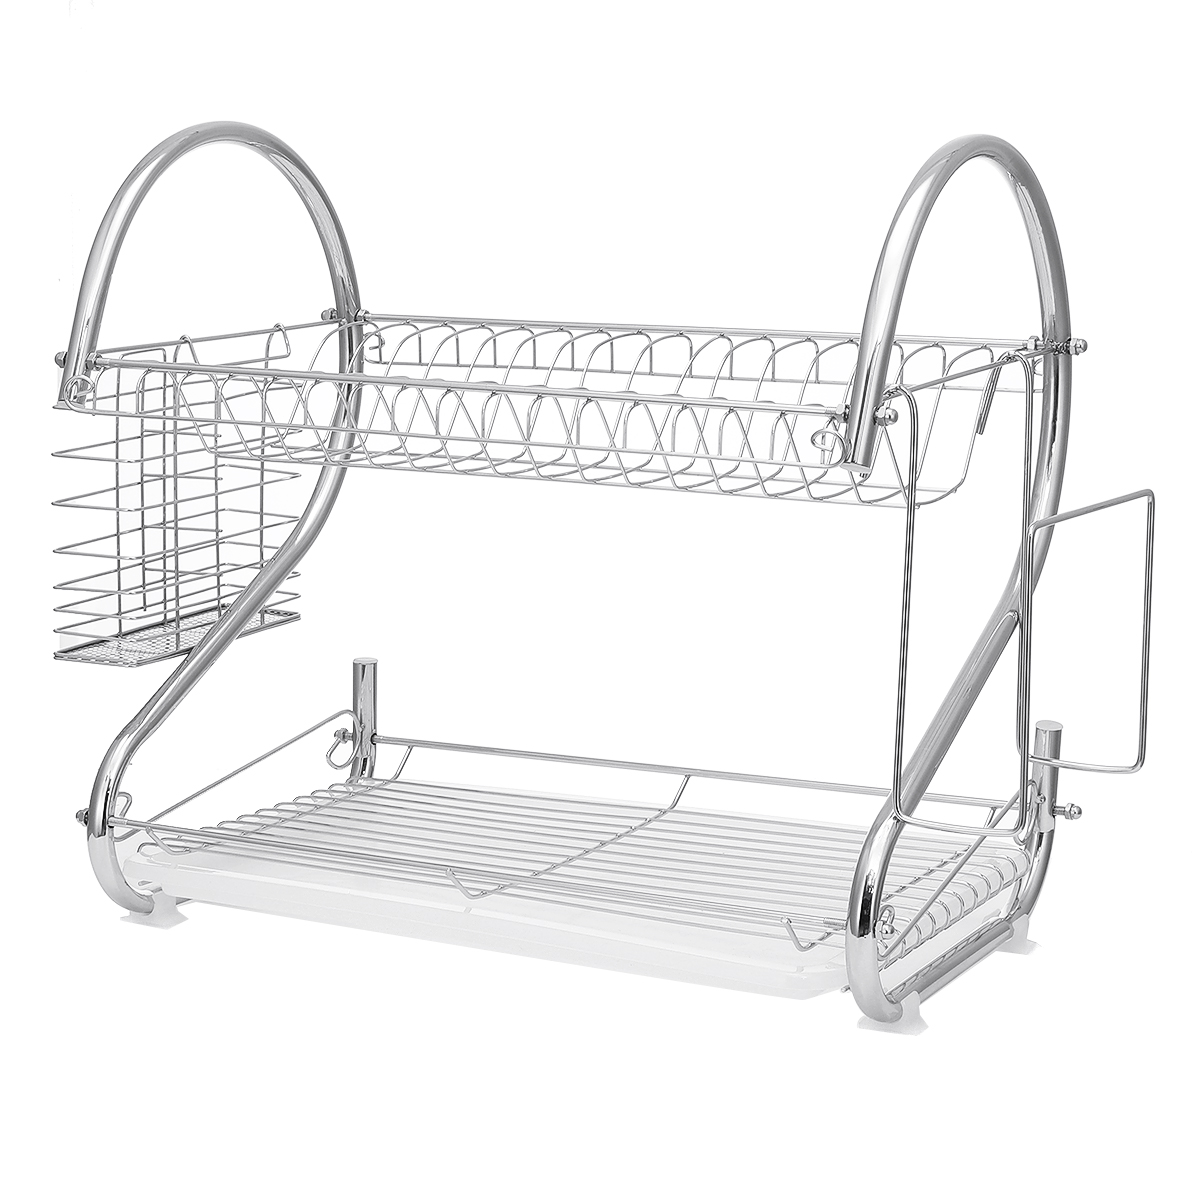 Dish-Drying-Rack-2-Tier-Dish-Rack-with-Utensil-Holder-Cup-Holder-and-Dish-Drainer-for-Kitchen-Counte-1665917-9